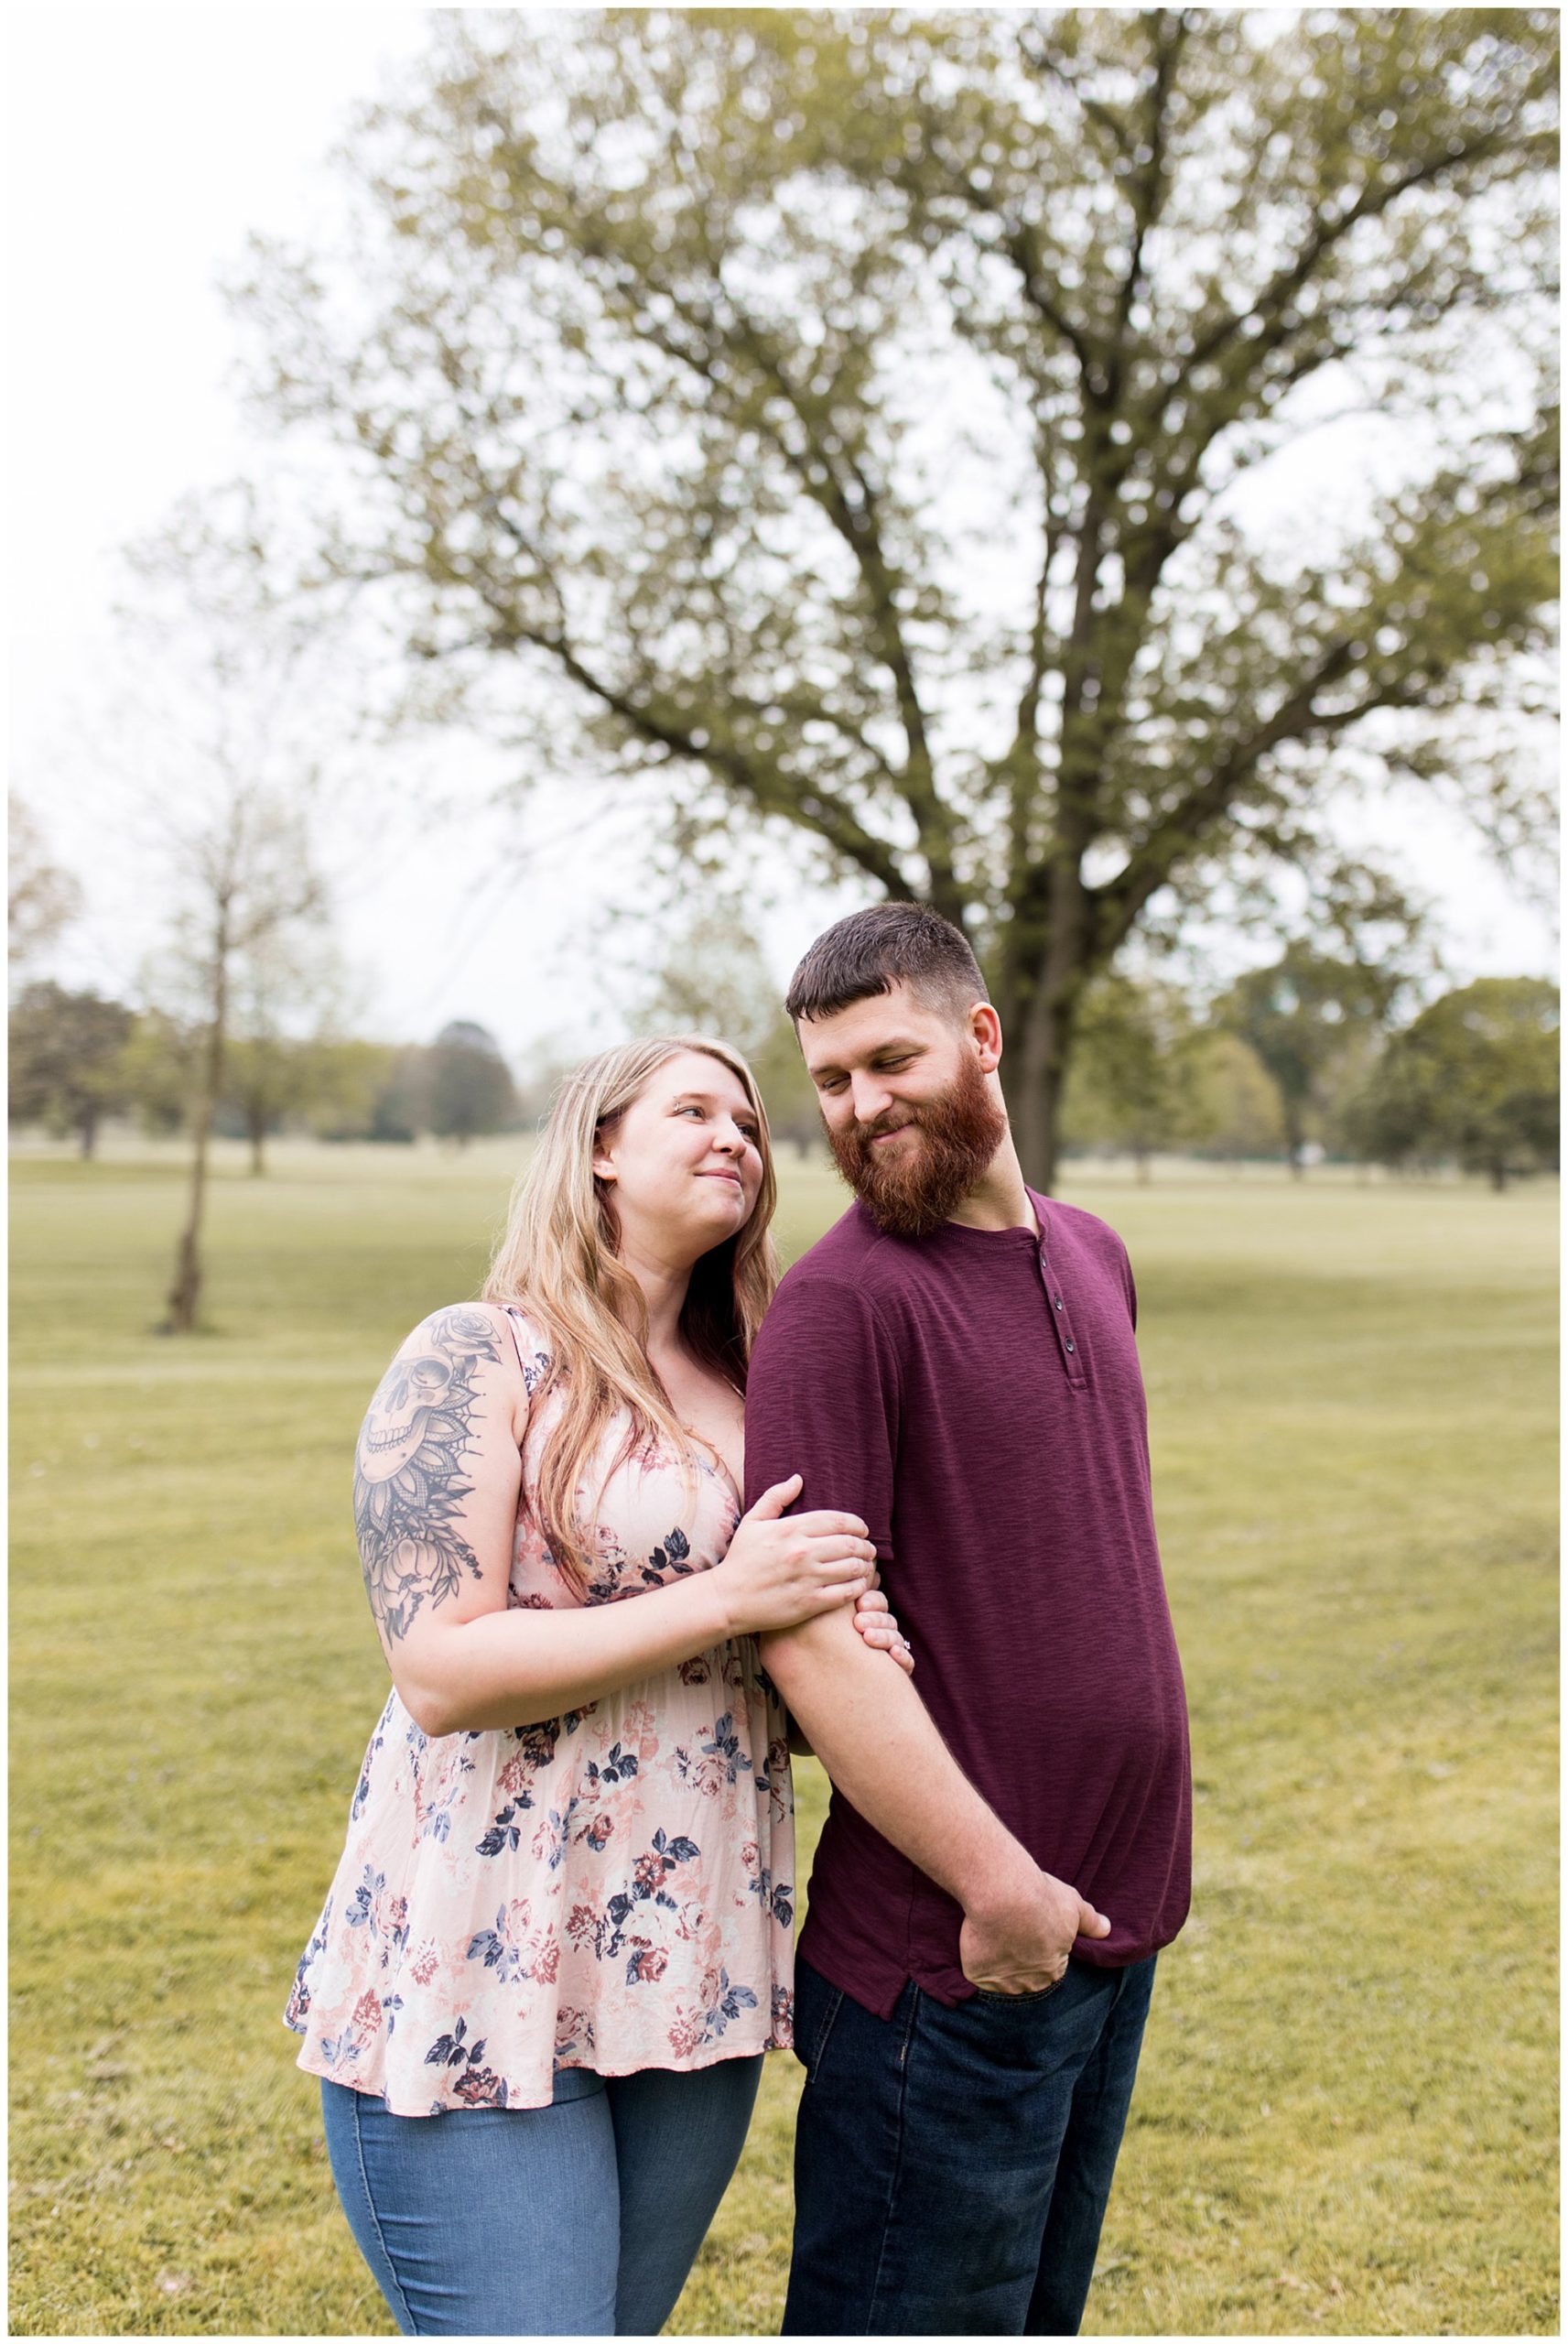 Foster Park engagement session in Fort Wayne, Indiana